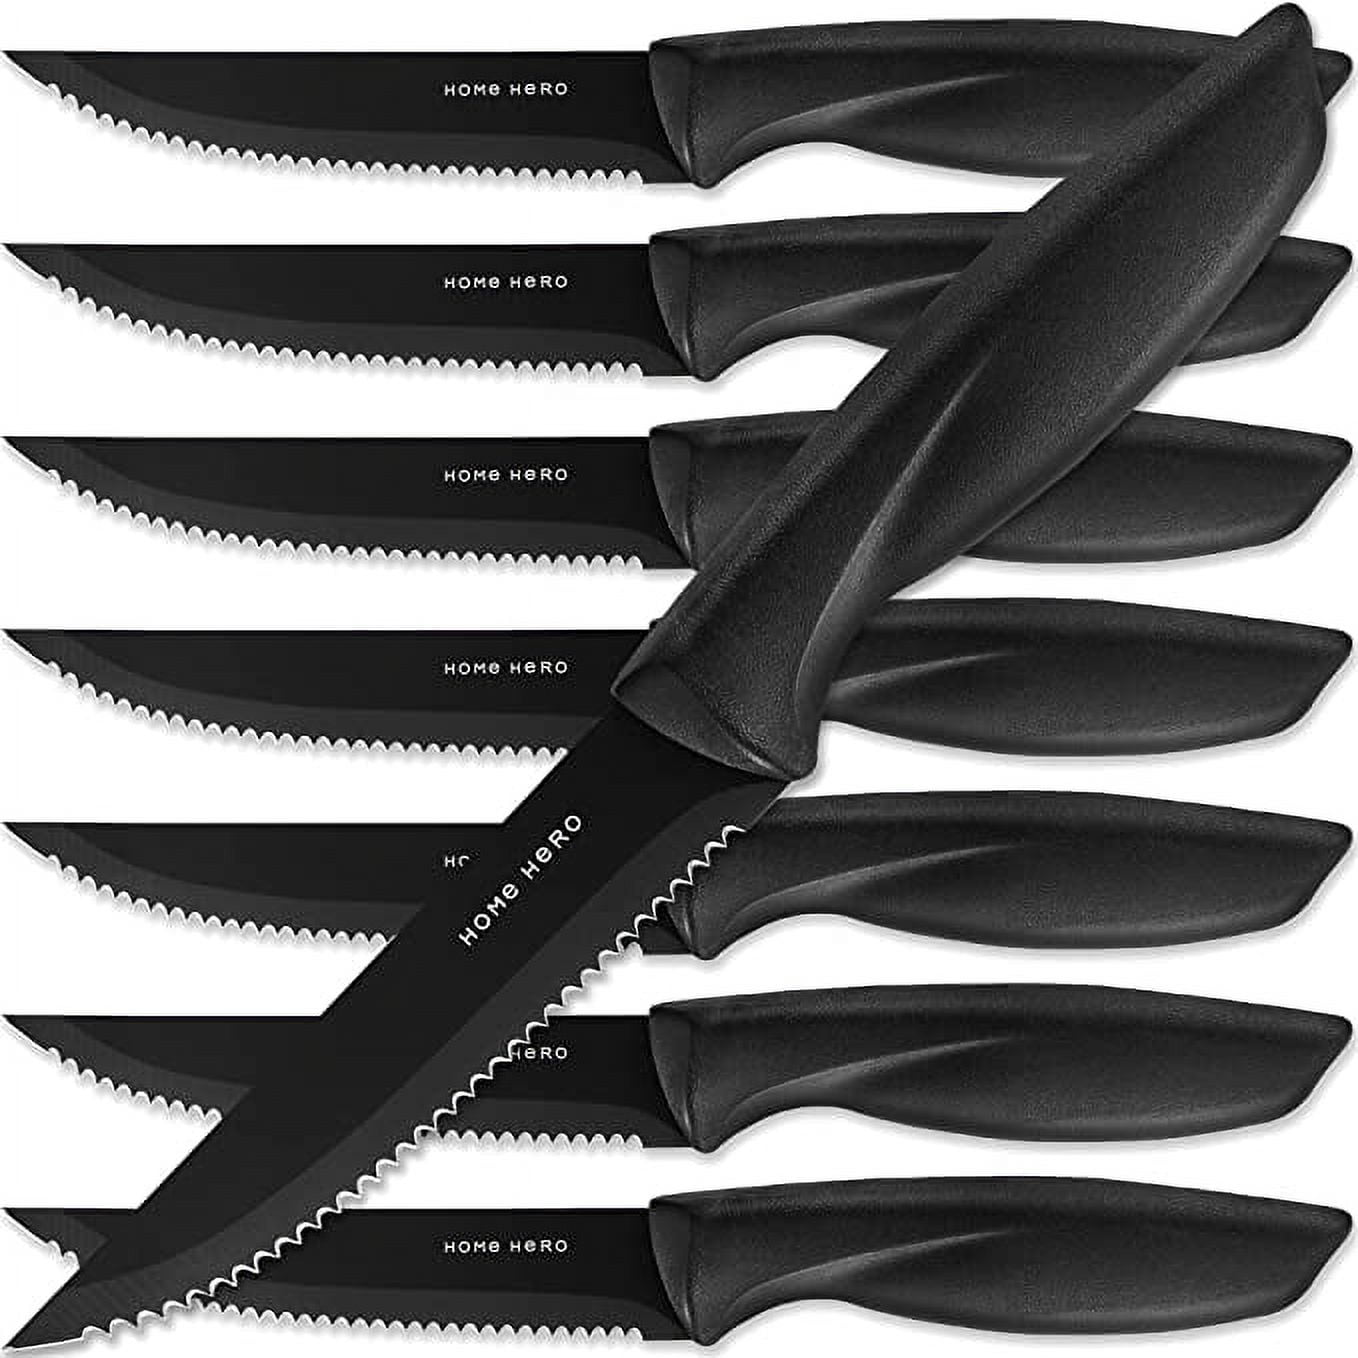 Steak Knife, Steak Knives Set of 8 with Sheath, Astercook Dishwasher Safe  High Carbon Stainless Steel Steak Knife with Cover, Black